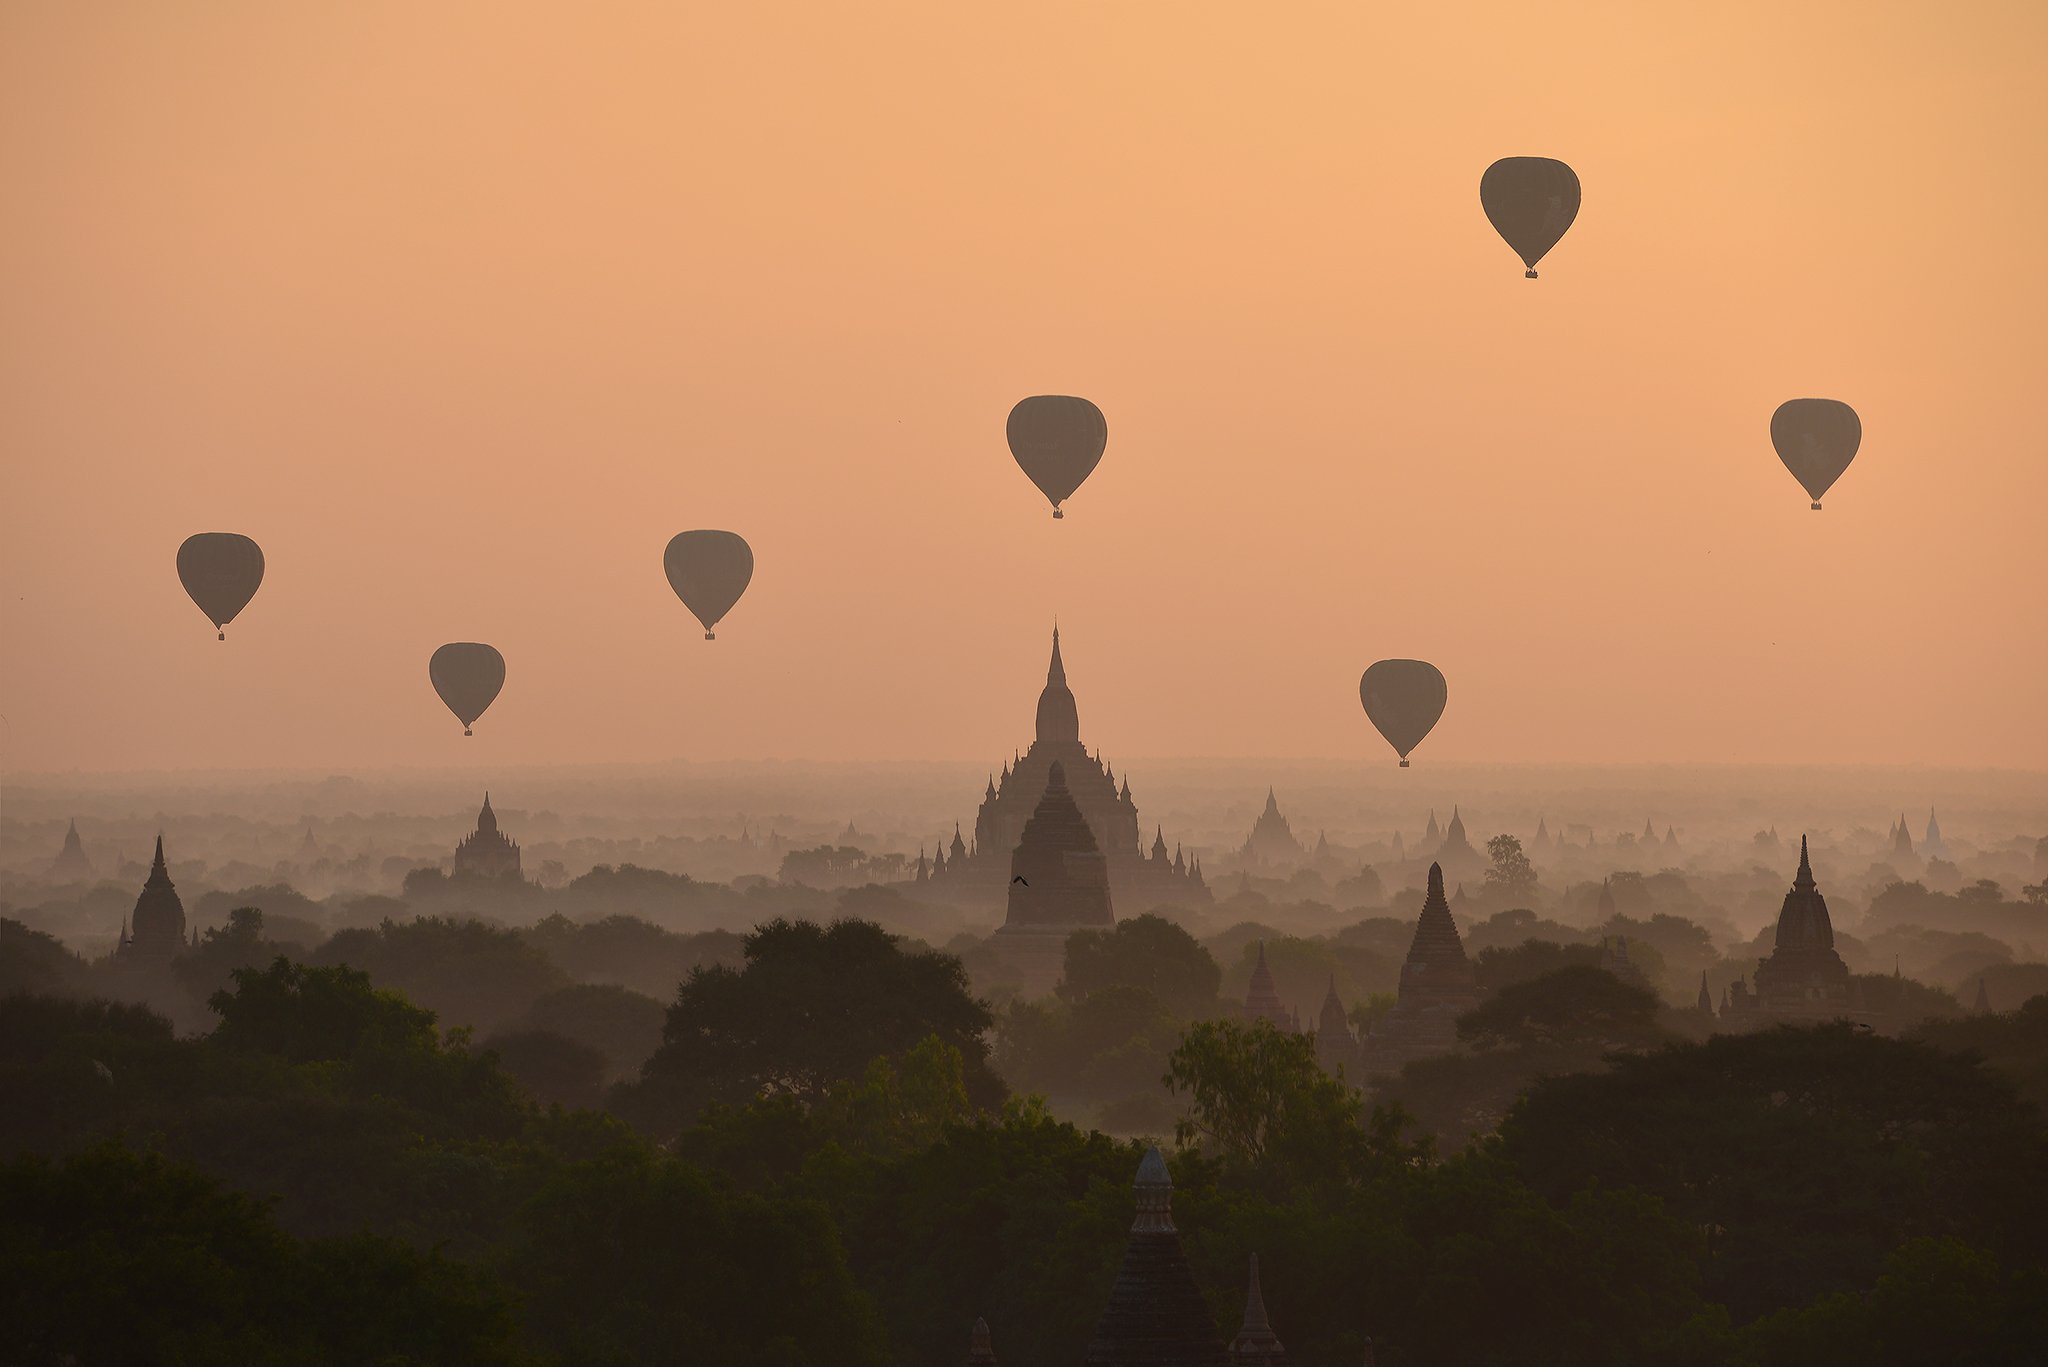 Weather Architecture Bagan Buddhism Built Structure Color Image Flying Fog Horizontal Hot Air Balloon Mid-Air Mode of Transport Mountain Myanmar Nature No People Outdoors Pagoda Photography Silhouette Sky Sunrise - Dawn Temple - Building Transportation Tr, sarawut intarob